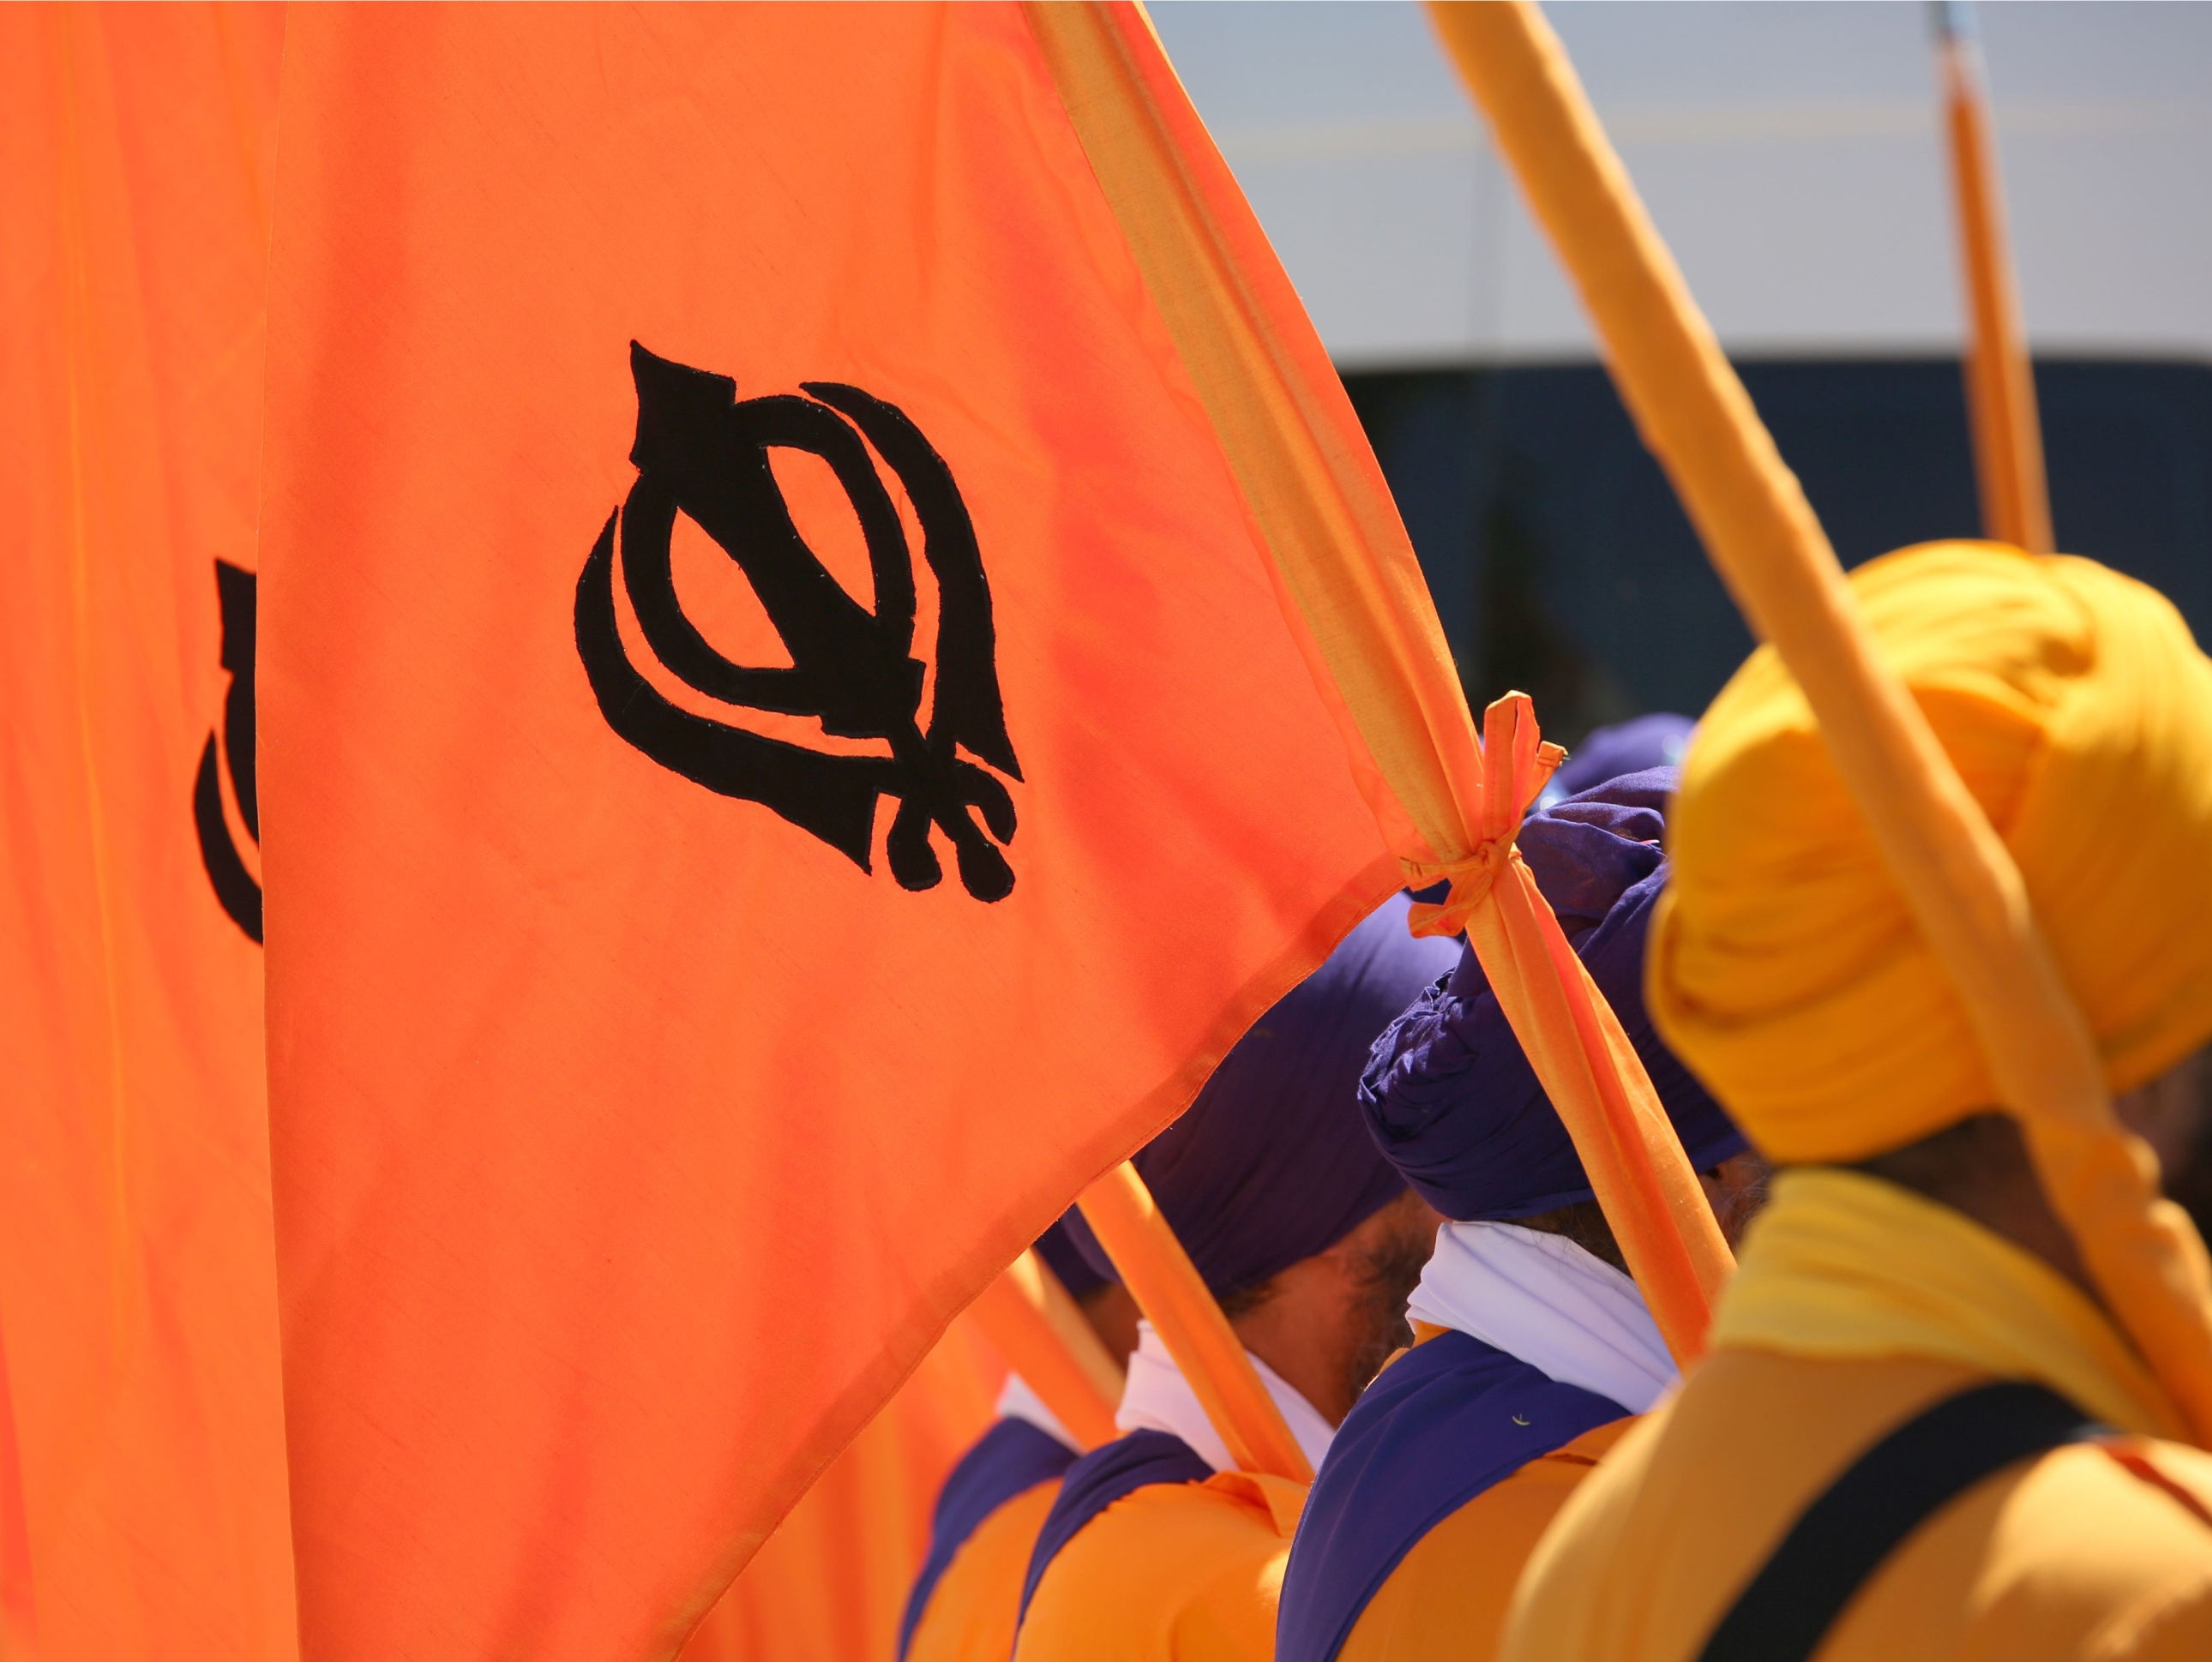 Orange flag with symbol of the Sikh religion called KHANDA formed by two scimitars and men with turbans